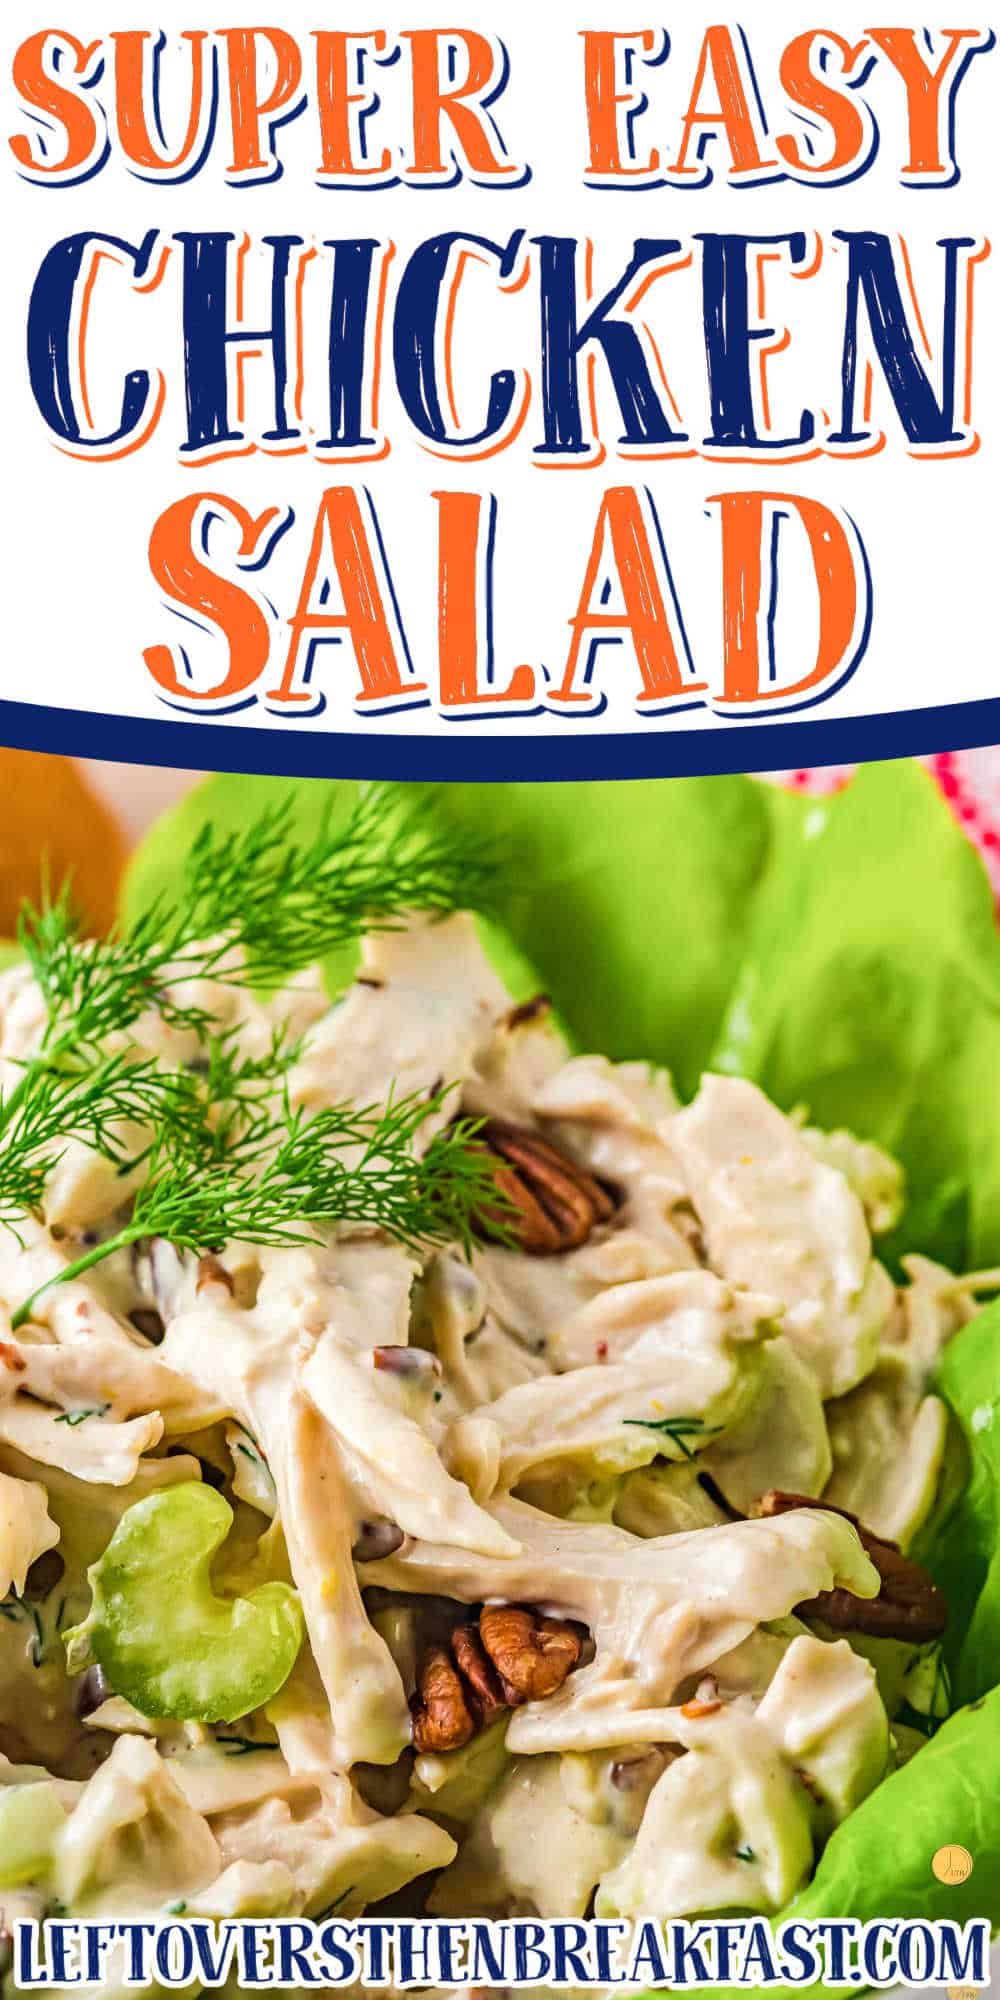 close up of salad with text "super easy chicken salad"